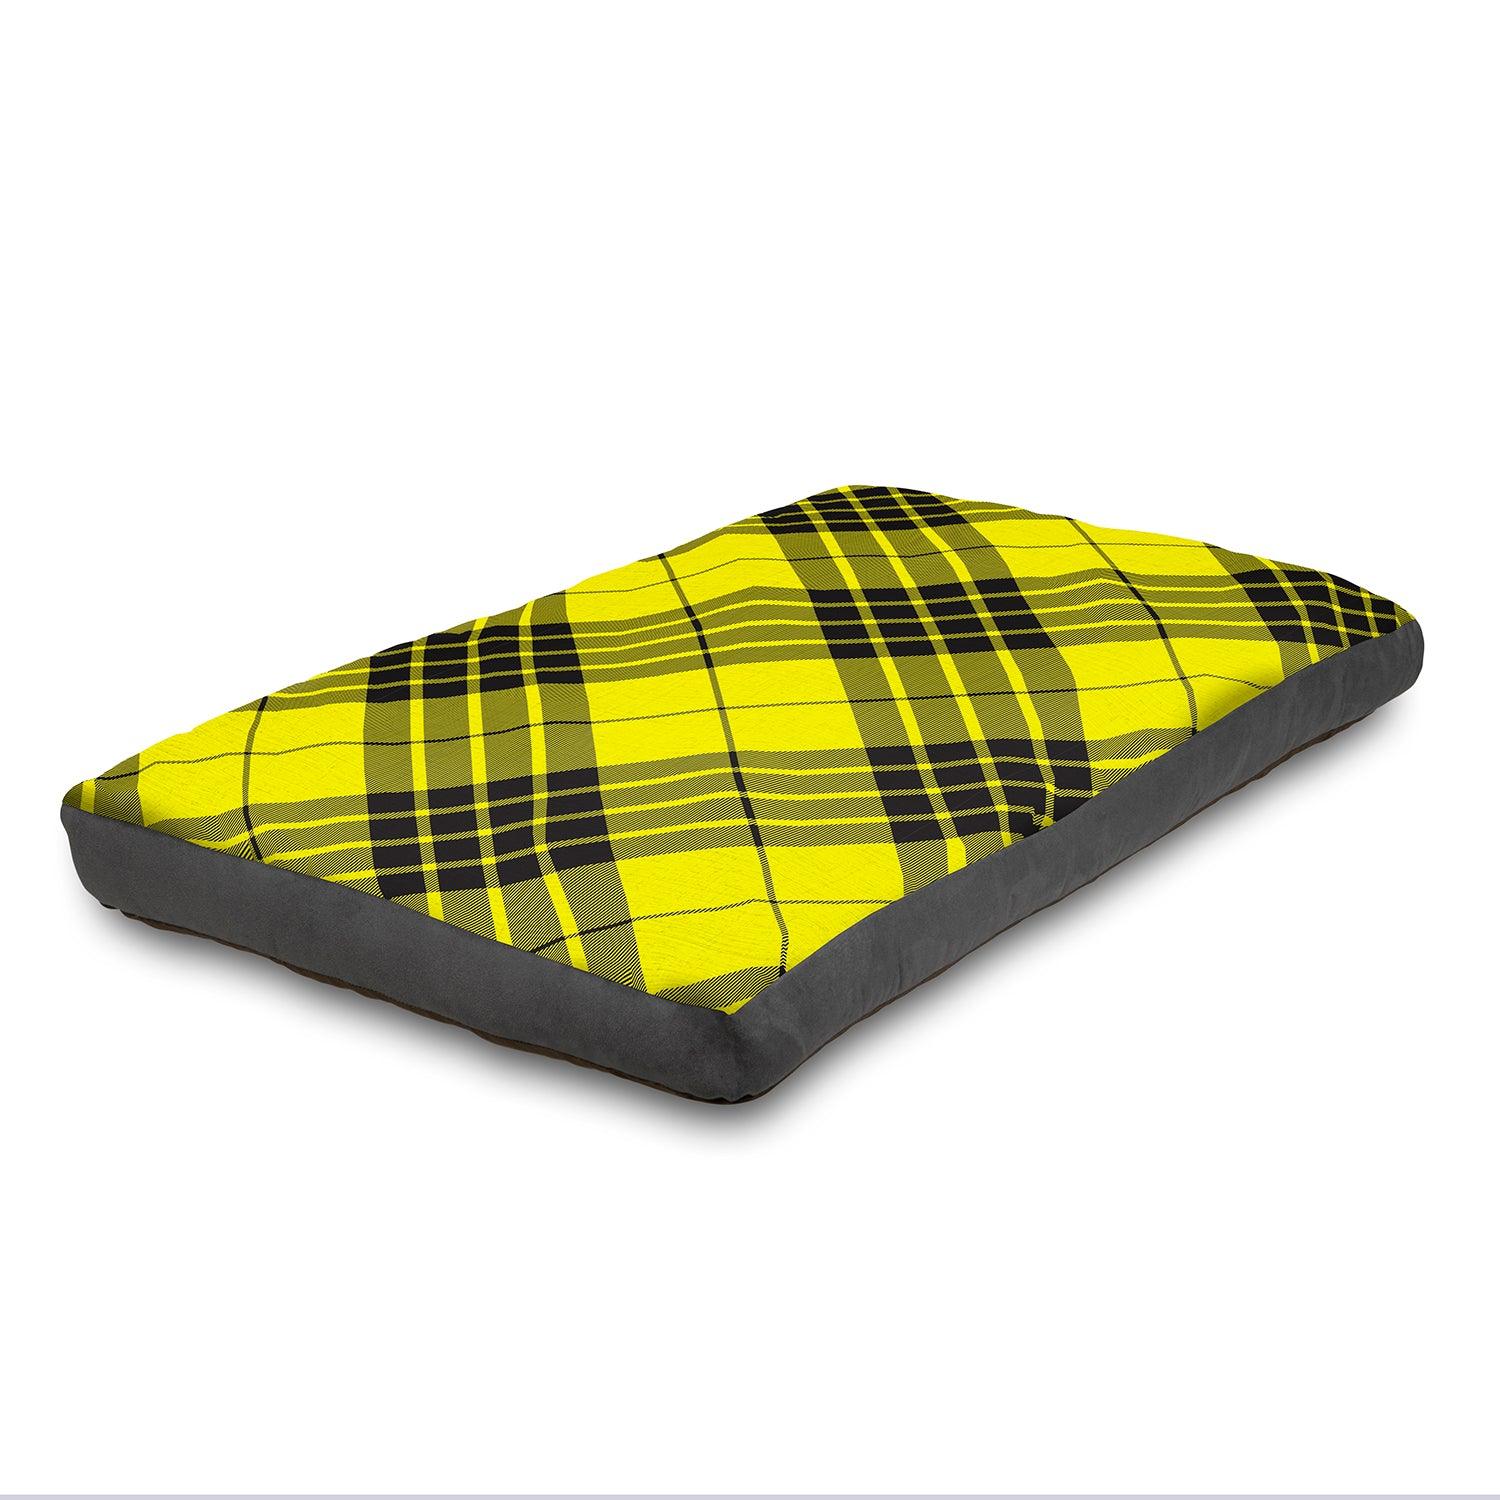 View Super Comfy Dog Bed Soft and Fluffy with Washable Cover XLarge 150 cm x 100 cm Yellow information